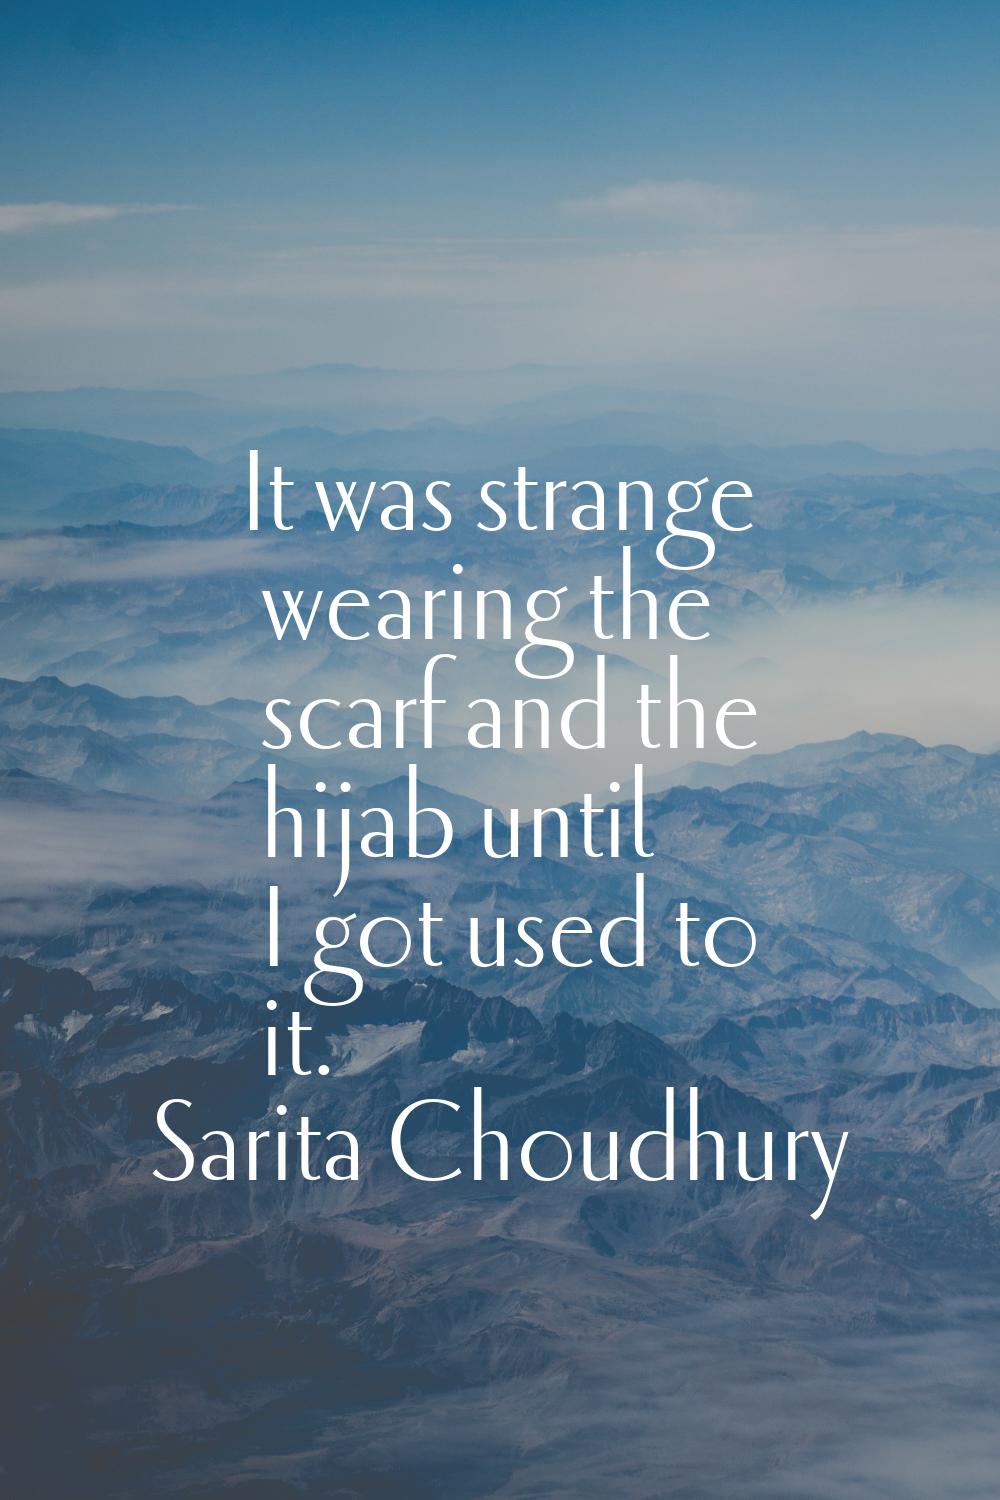 It was strange wearing the scarf and the hijab until I got used to it.